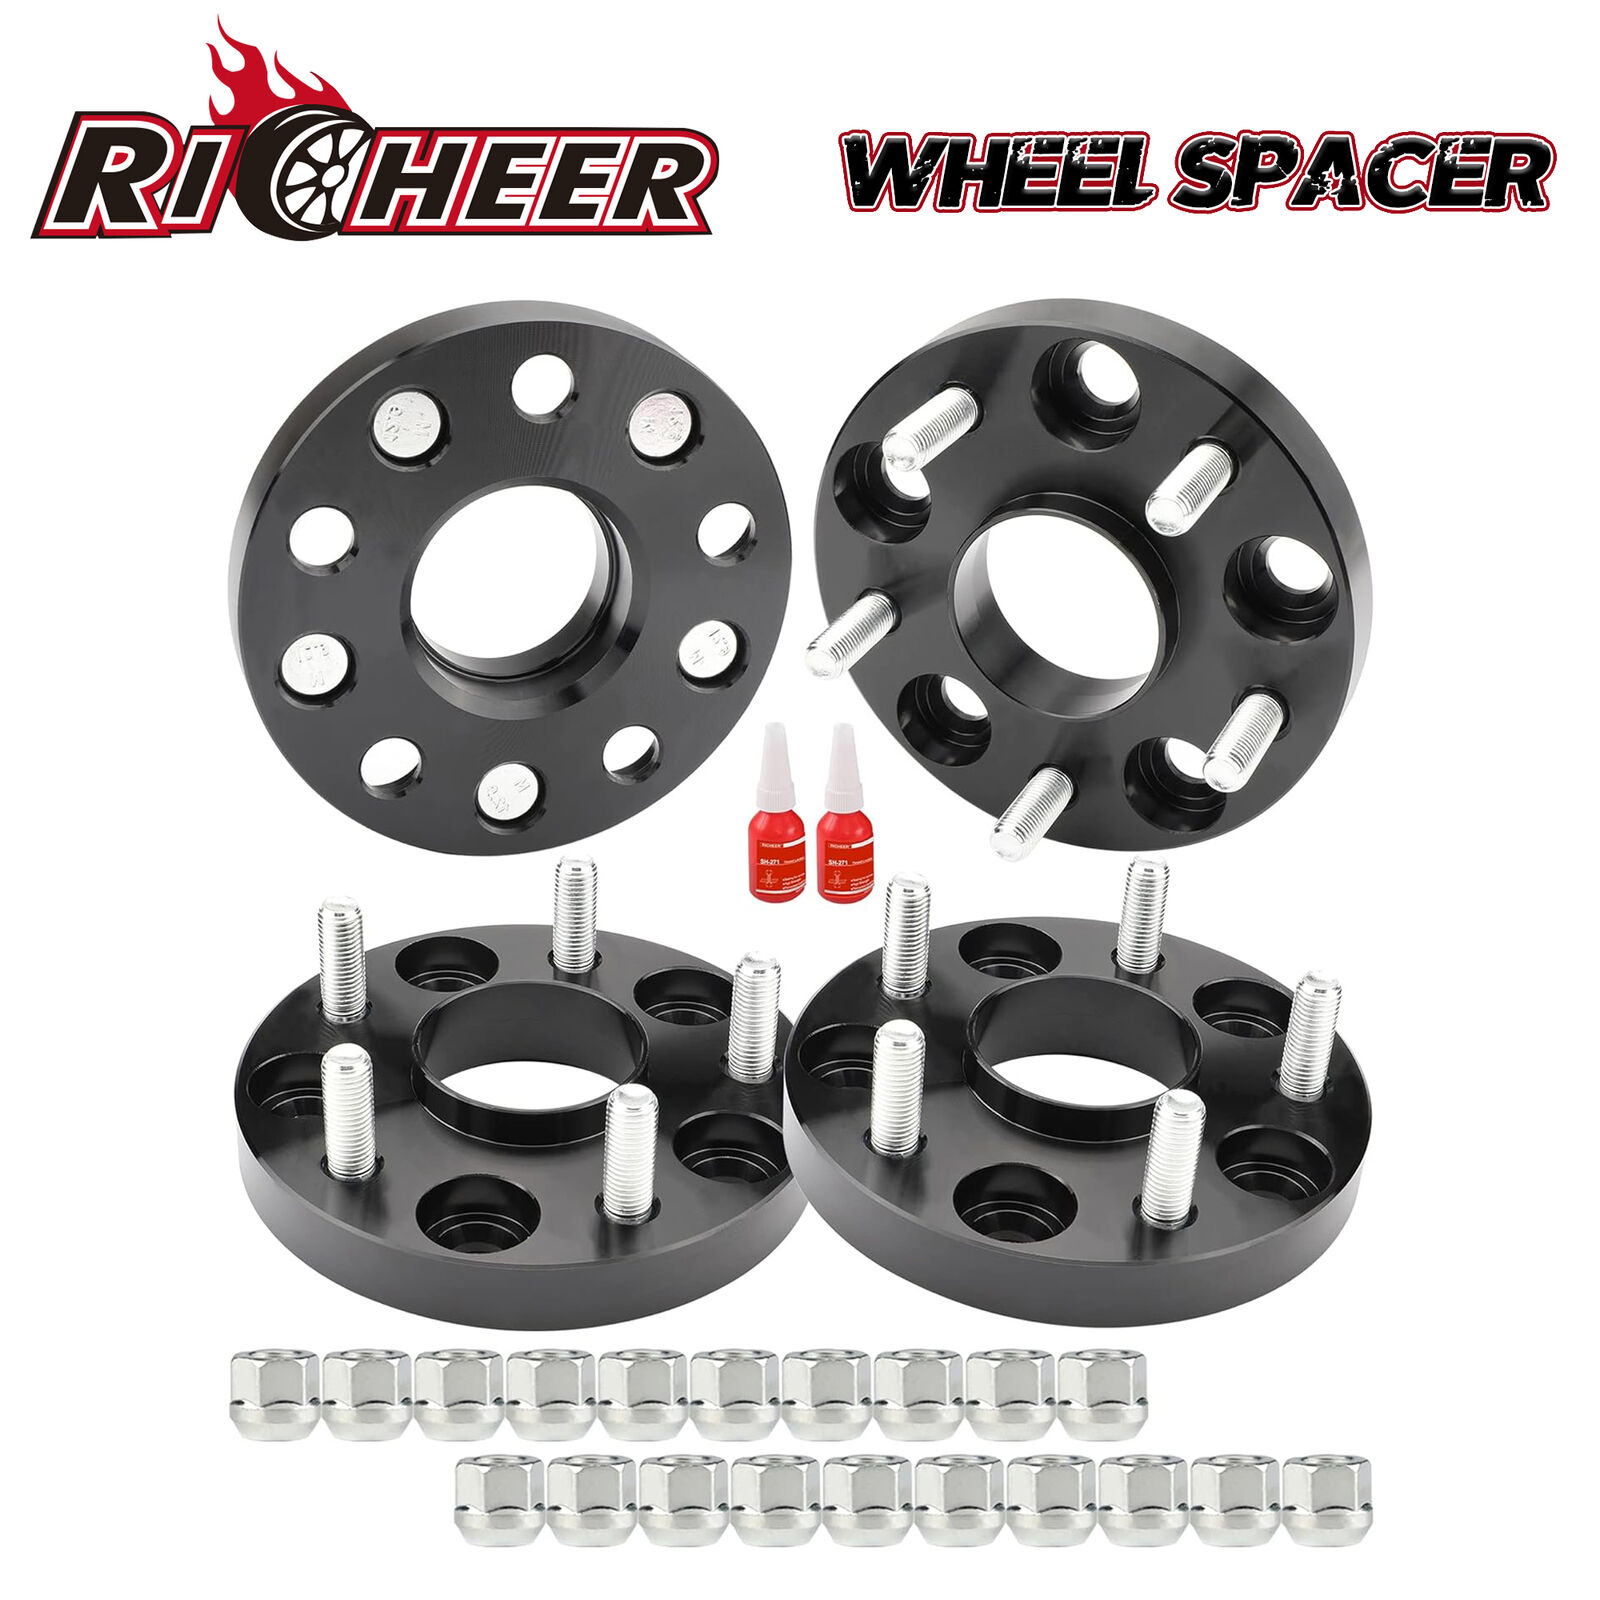 20mm 5x4.5 Hubcentric  Wheel Spacer 60.1 For Lexus IS250 IS300 ES300 ES350 GS300